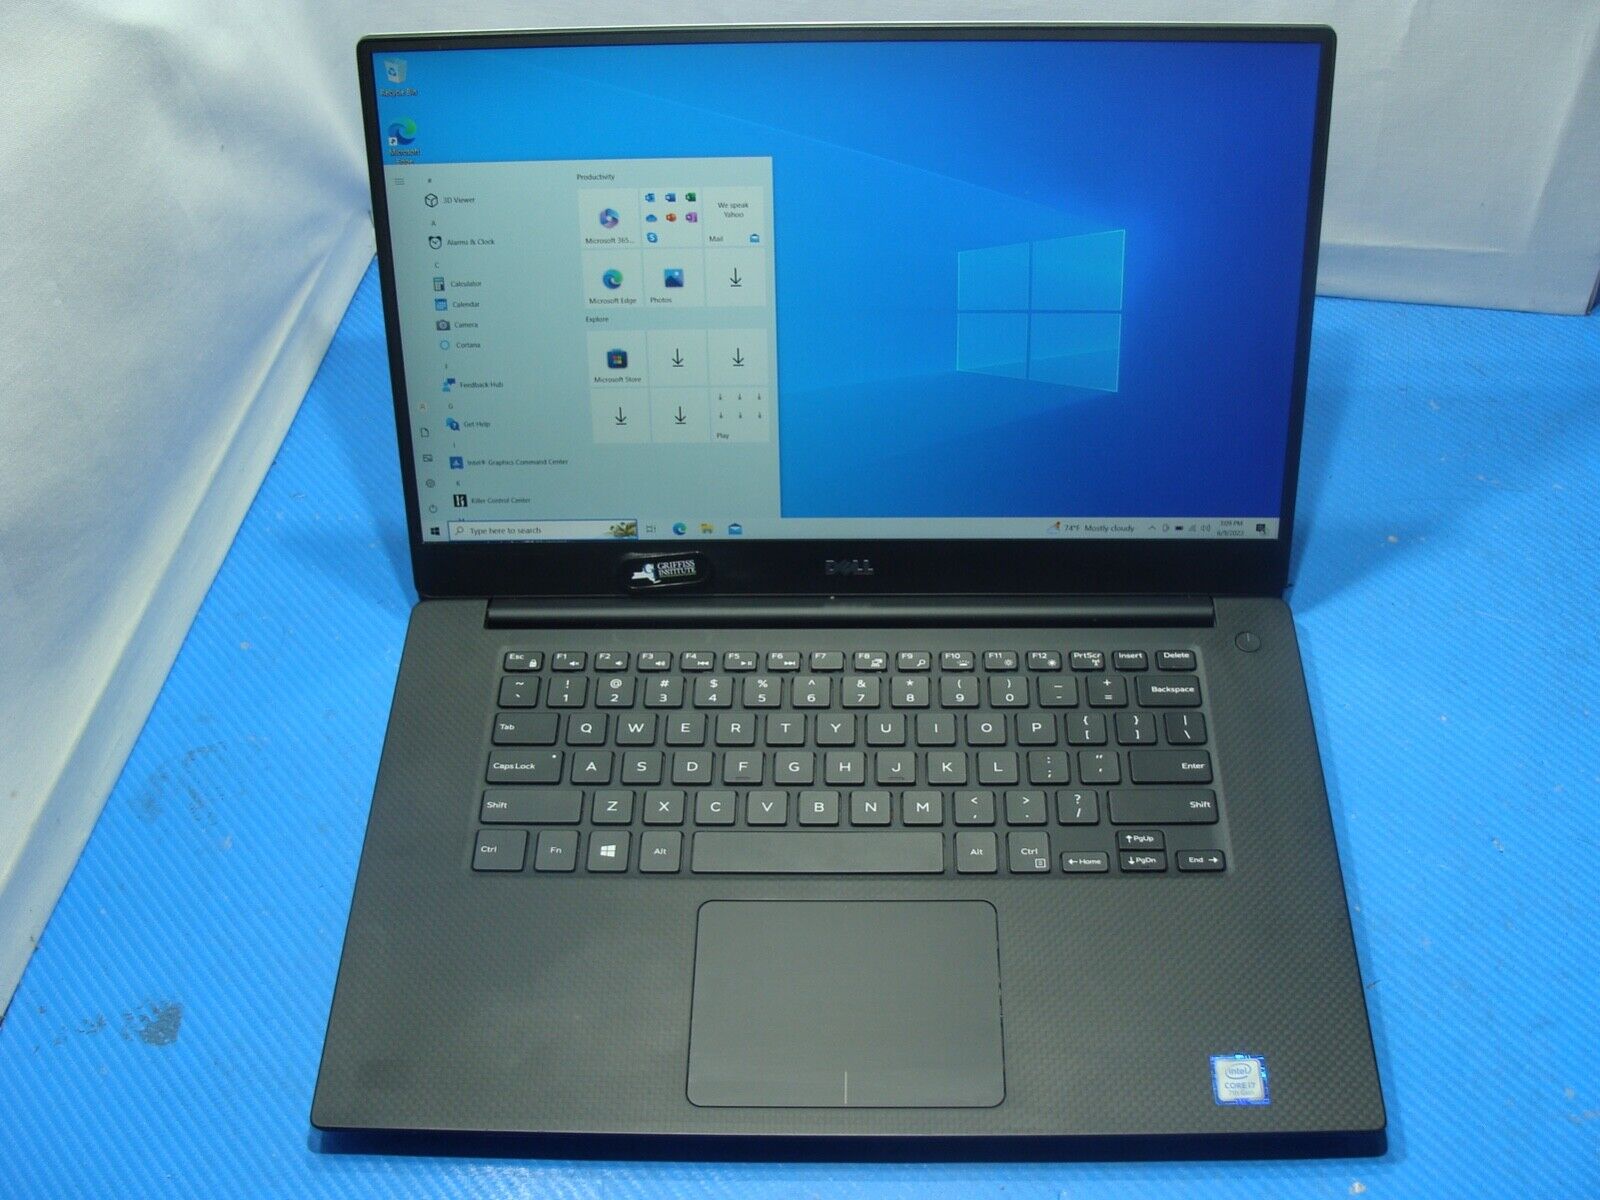 Reliable Dell XPS 15 9560 15.6"(512GB SSD Intel Core i7-7700HQ, 2.8 GHz 16GB RAM